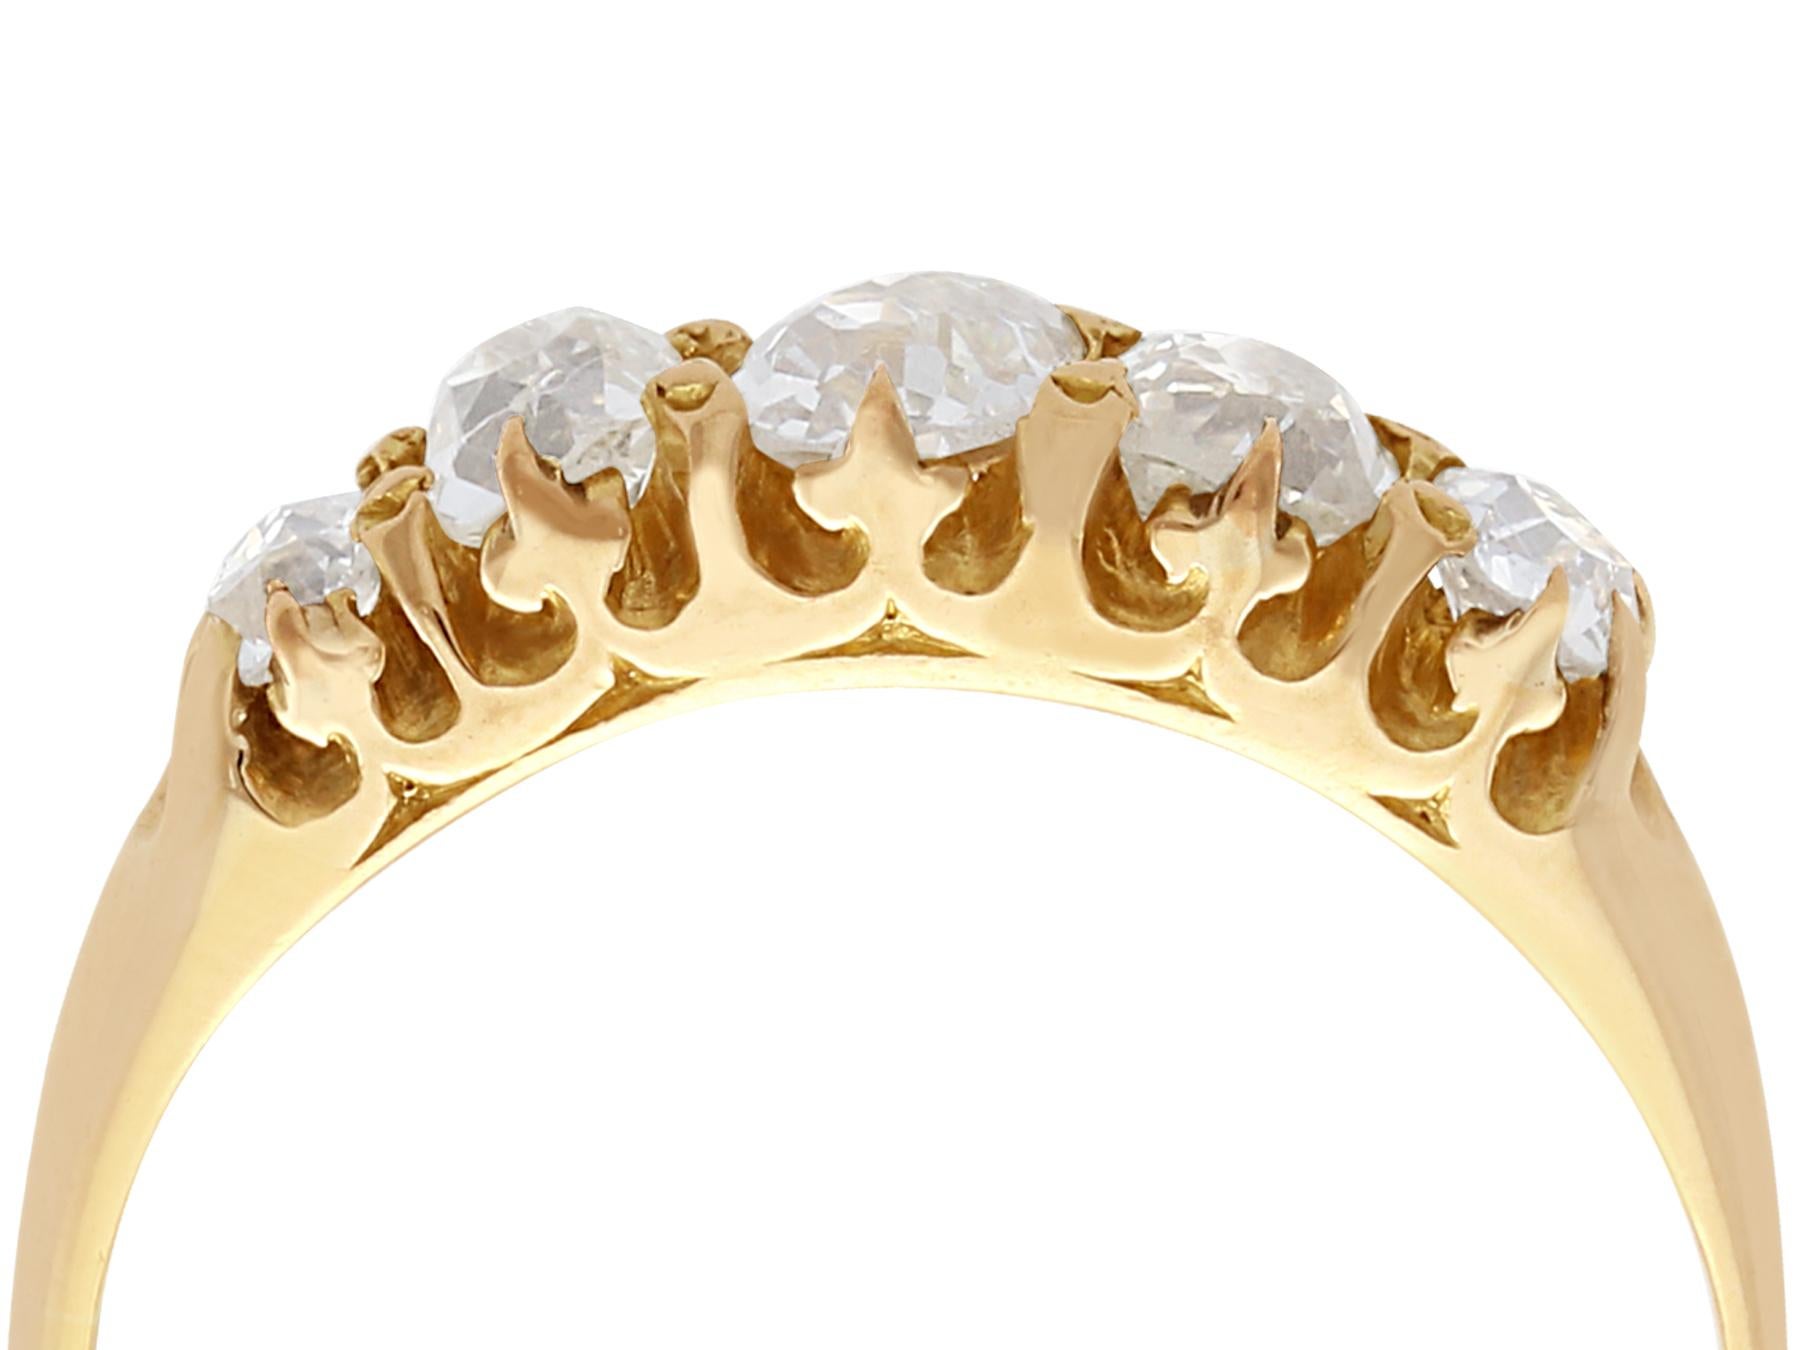 An impressive antique 0.90 carat diamond and 18 karat yellow gold five stone five stone ring; part of our diverse antique jewelry and estate jewelry collections

This fine and impressive Edwardian diamond ring has been crafted in 18k yellow